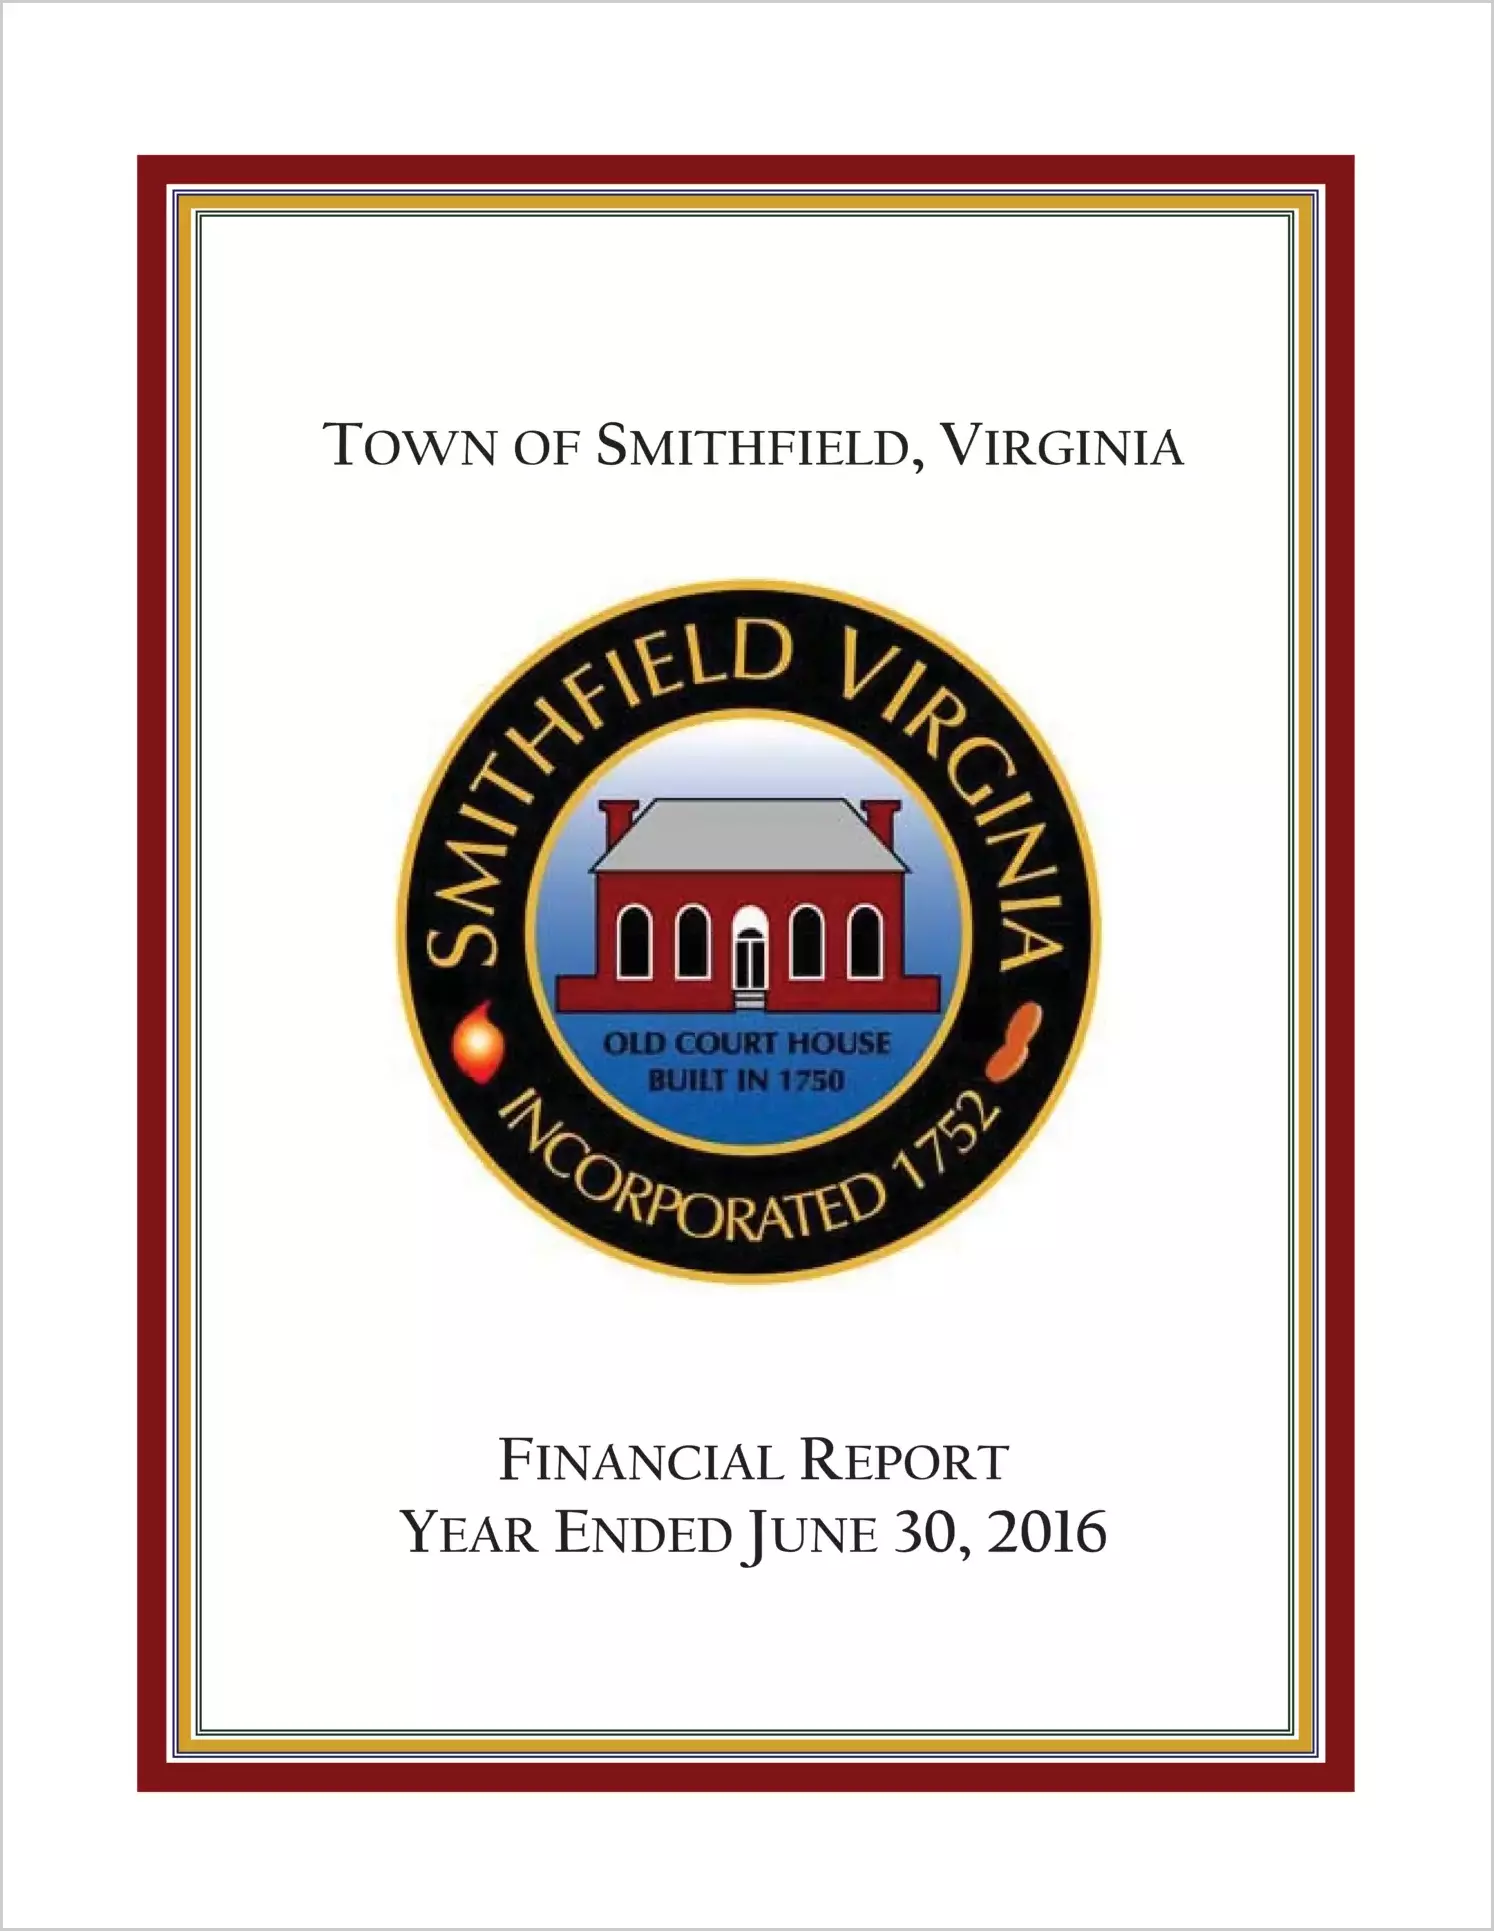 2016 Annual Financial Report for Town of Smithfield